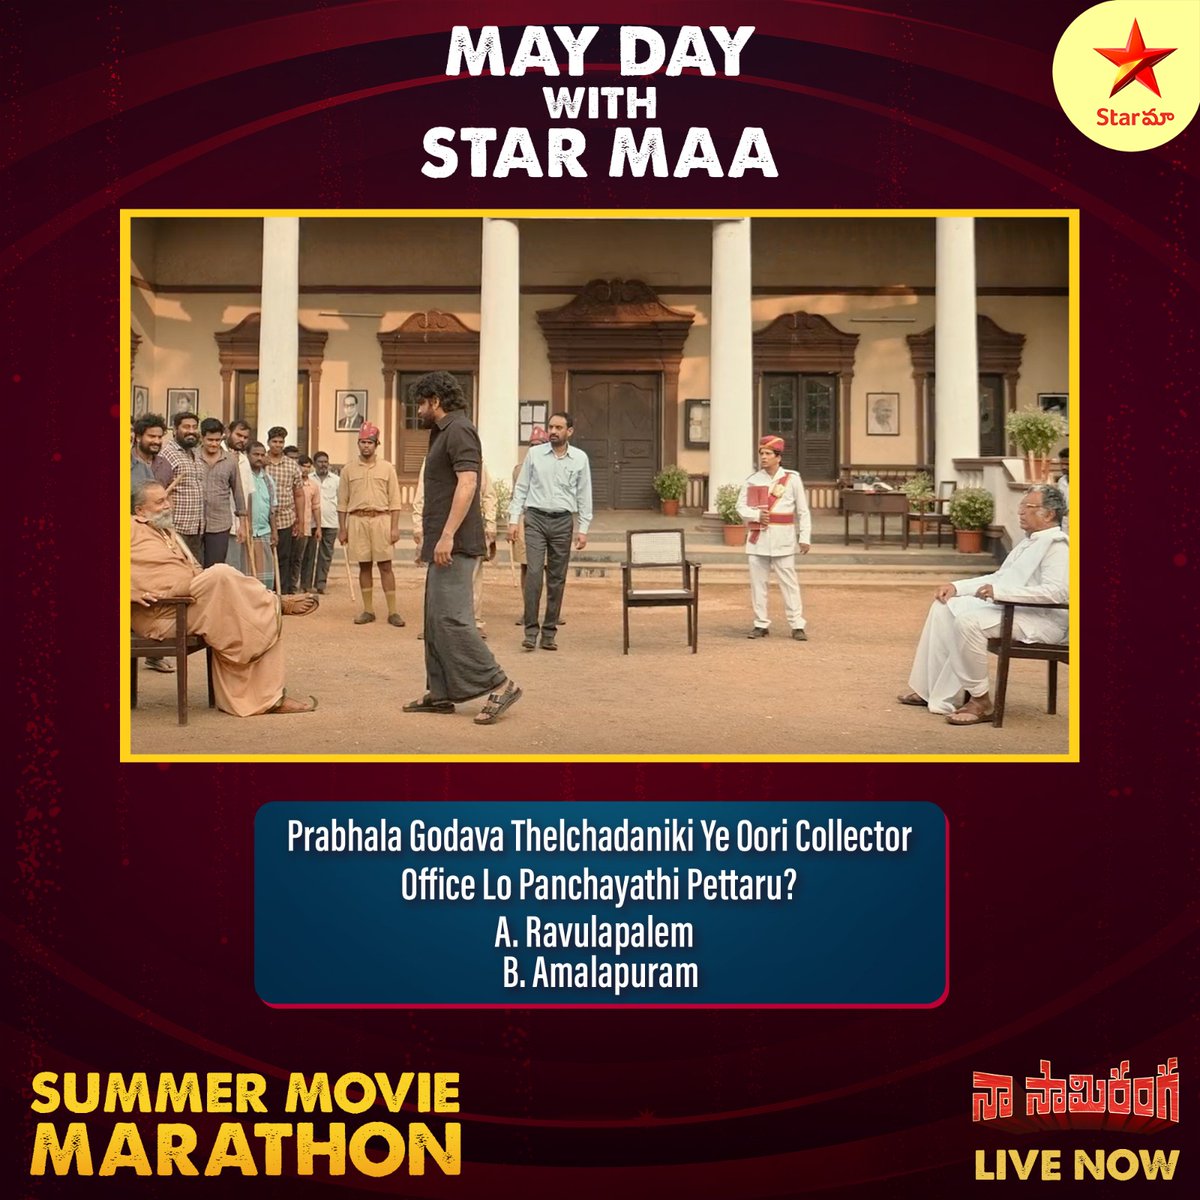 🌟 Attention all 'Naa Saami Ranga' movie enthusiasts! Can you guess in which town the collector's office meeting to solve the issue has been decided? Drop your answer in the comments below! 🏛️#MayDaySpecial  on Star Maa, featuring the blockbuster movie #NaaSaamiRanga #StarMaa